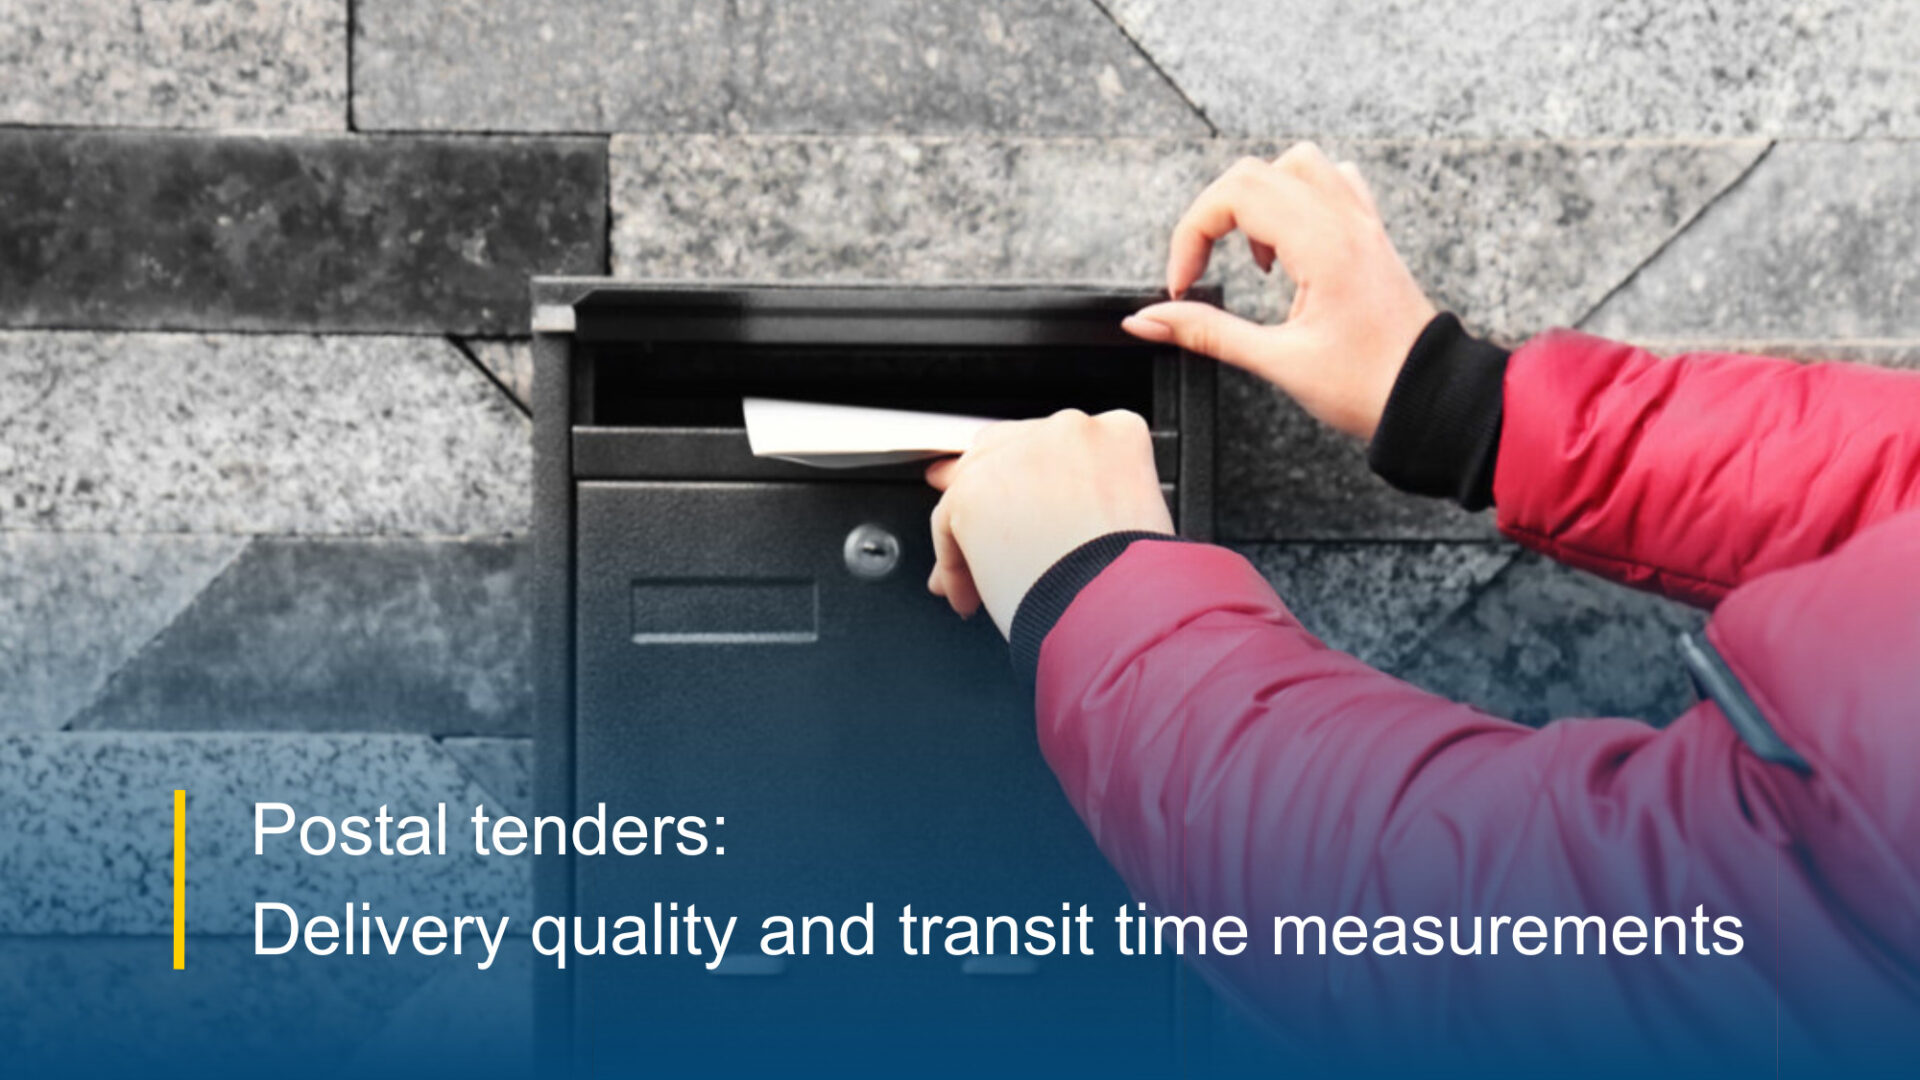 Postal tenders: Delivery quality and transit time measurements